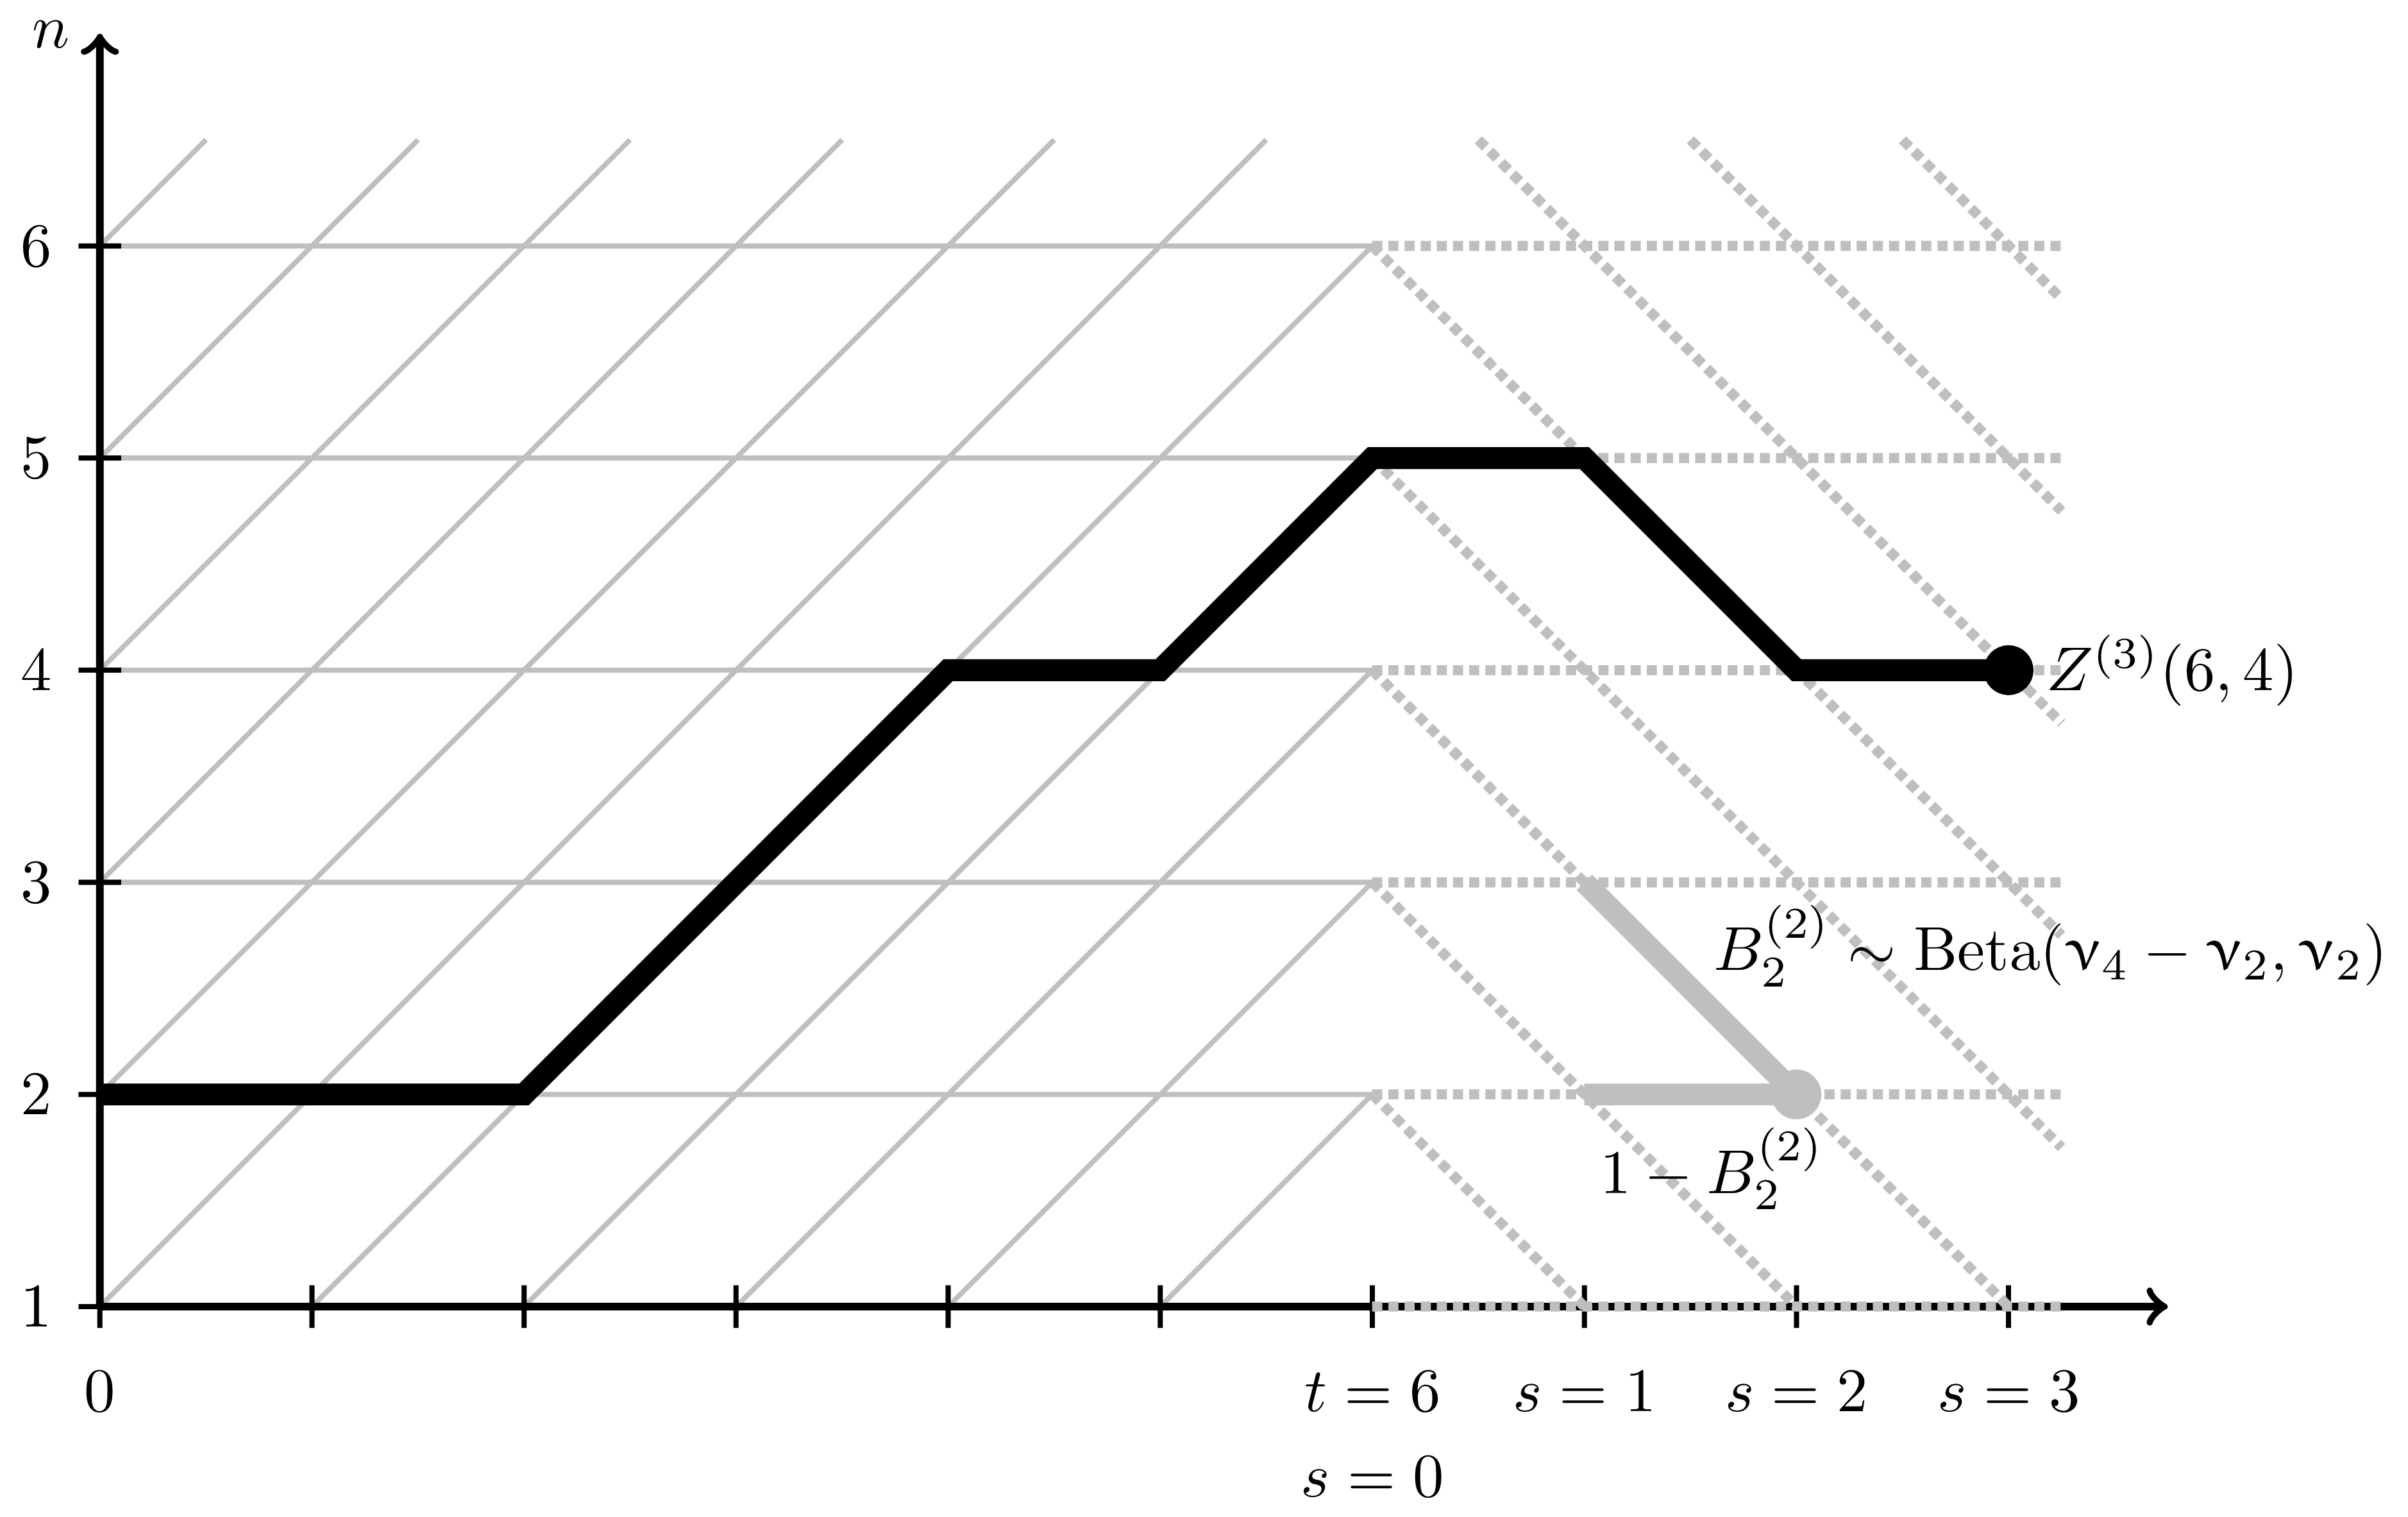 Modification of the lattice leading to the elimination of parameters of the beta polymer